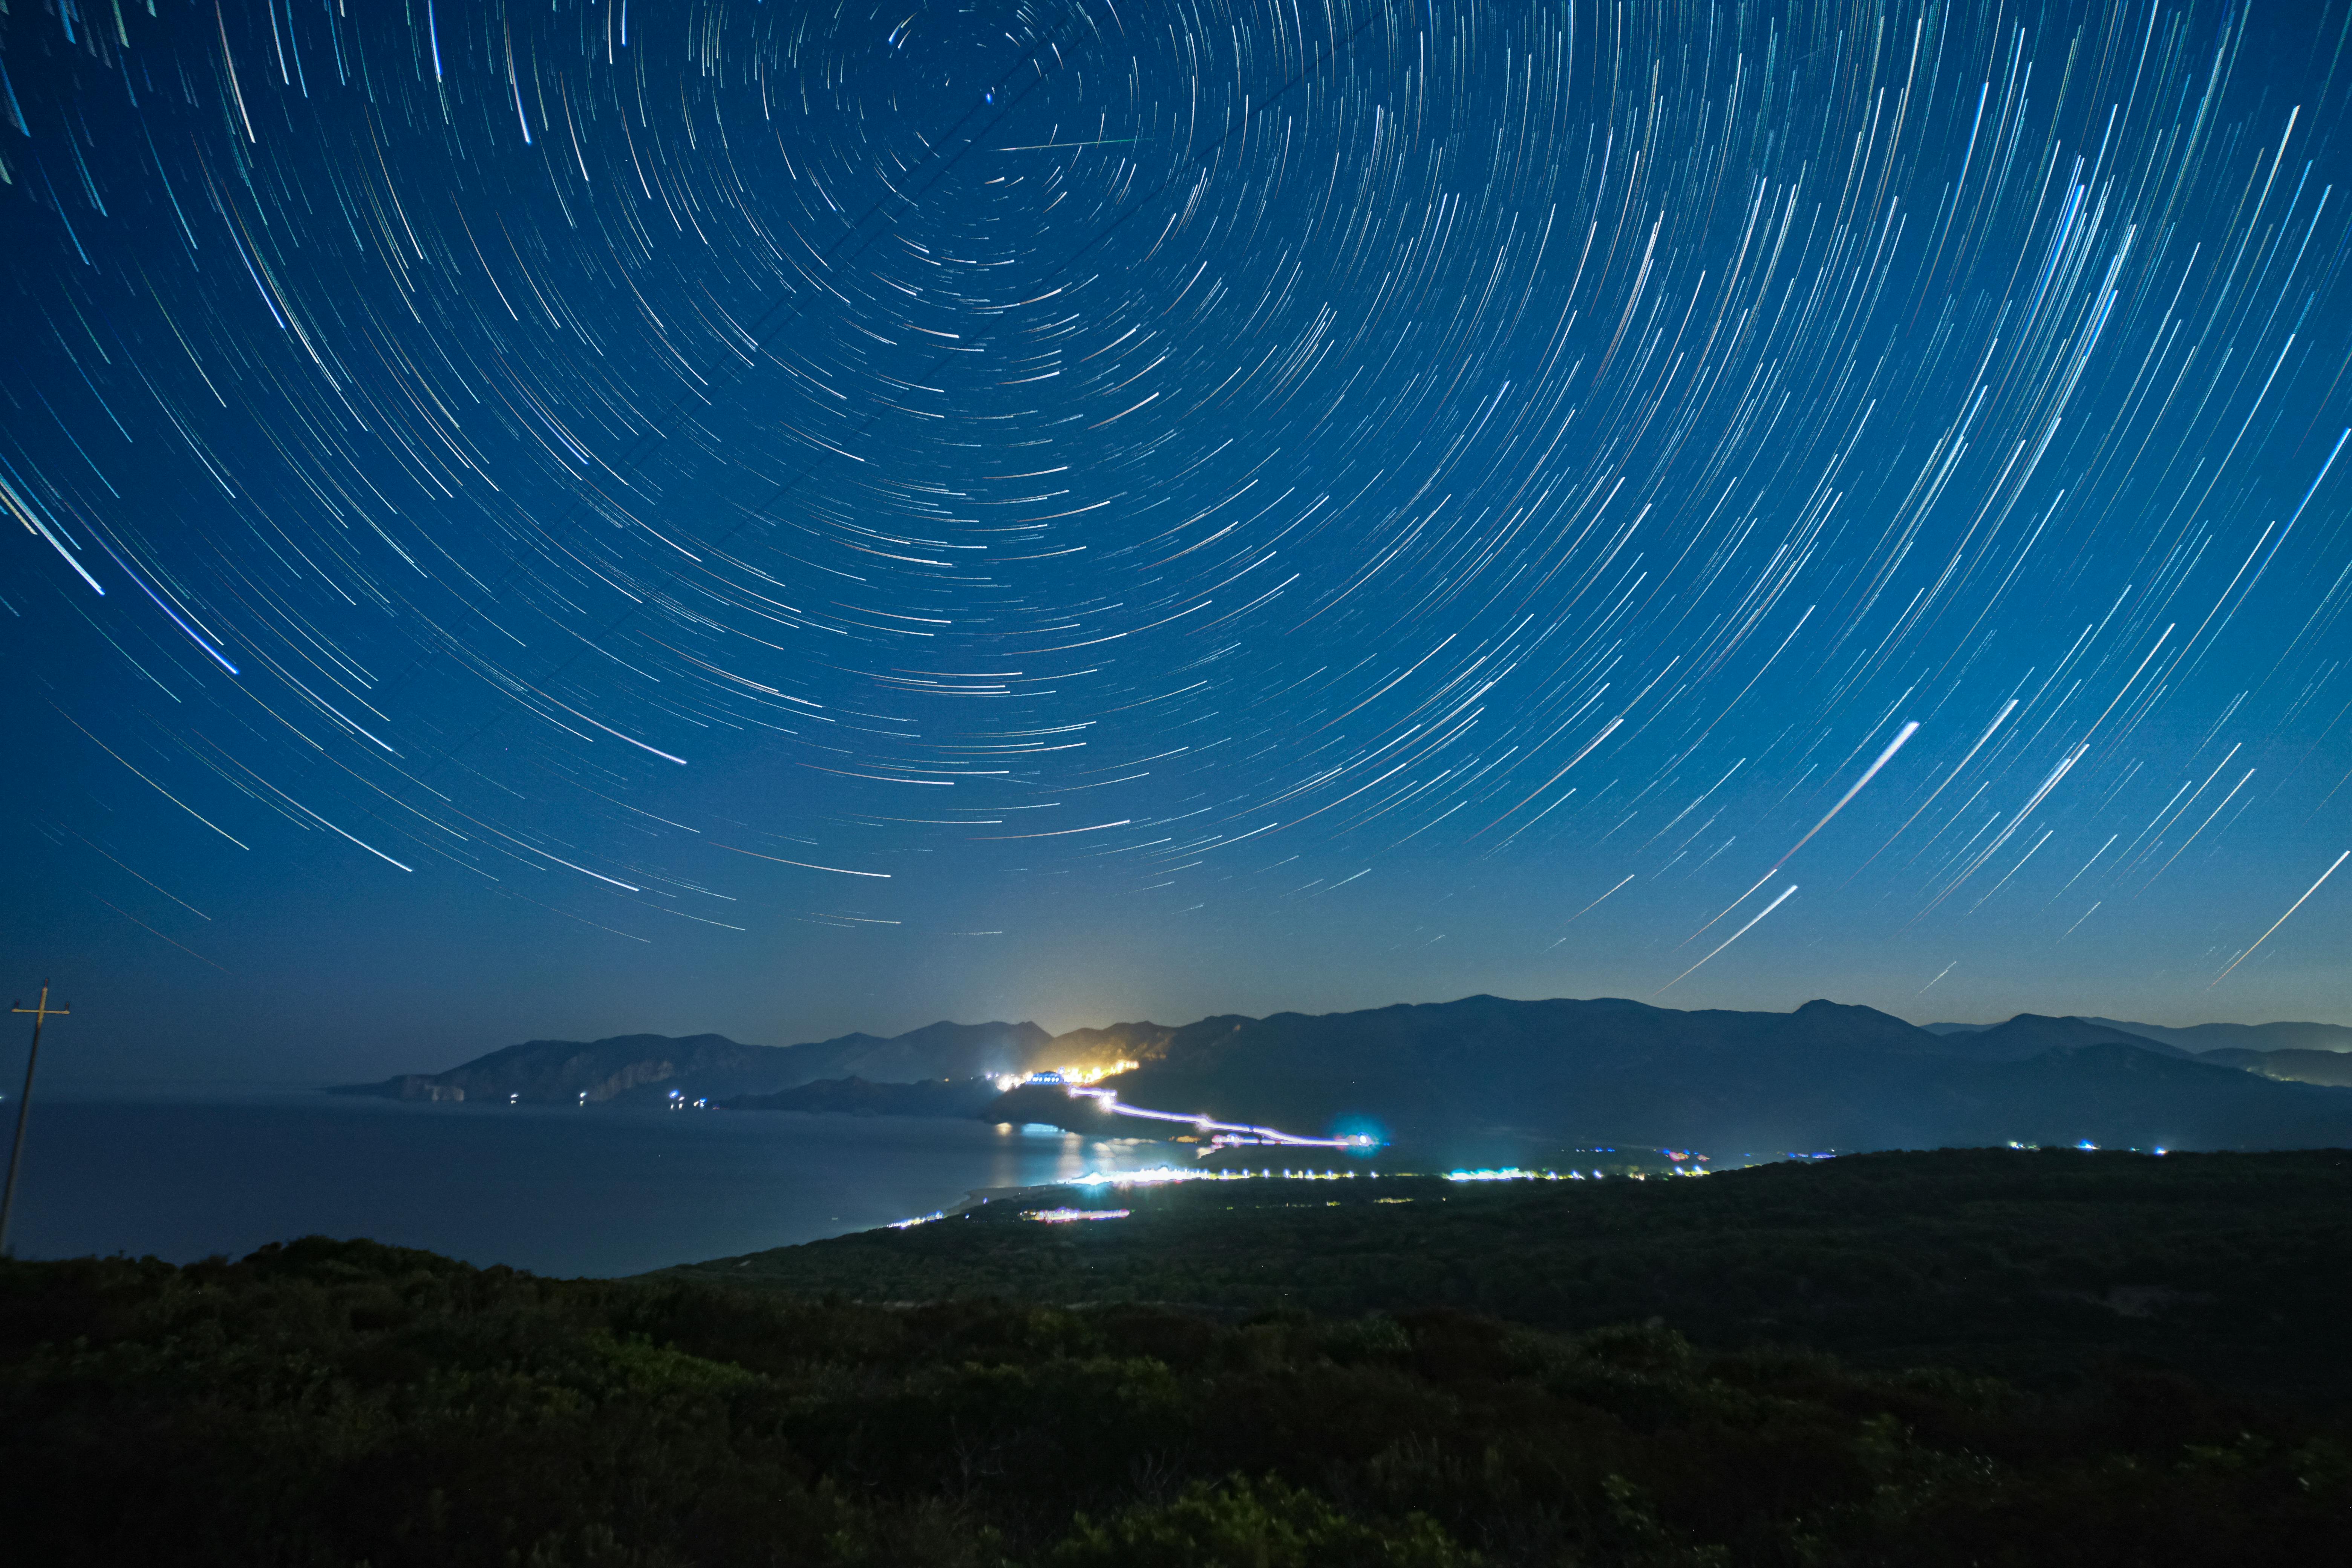 silhouette of mountains under blue starry sky in time lapse photography